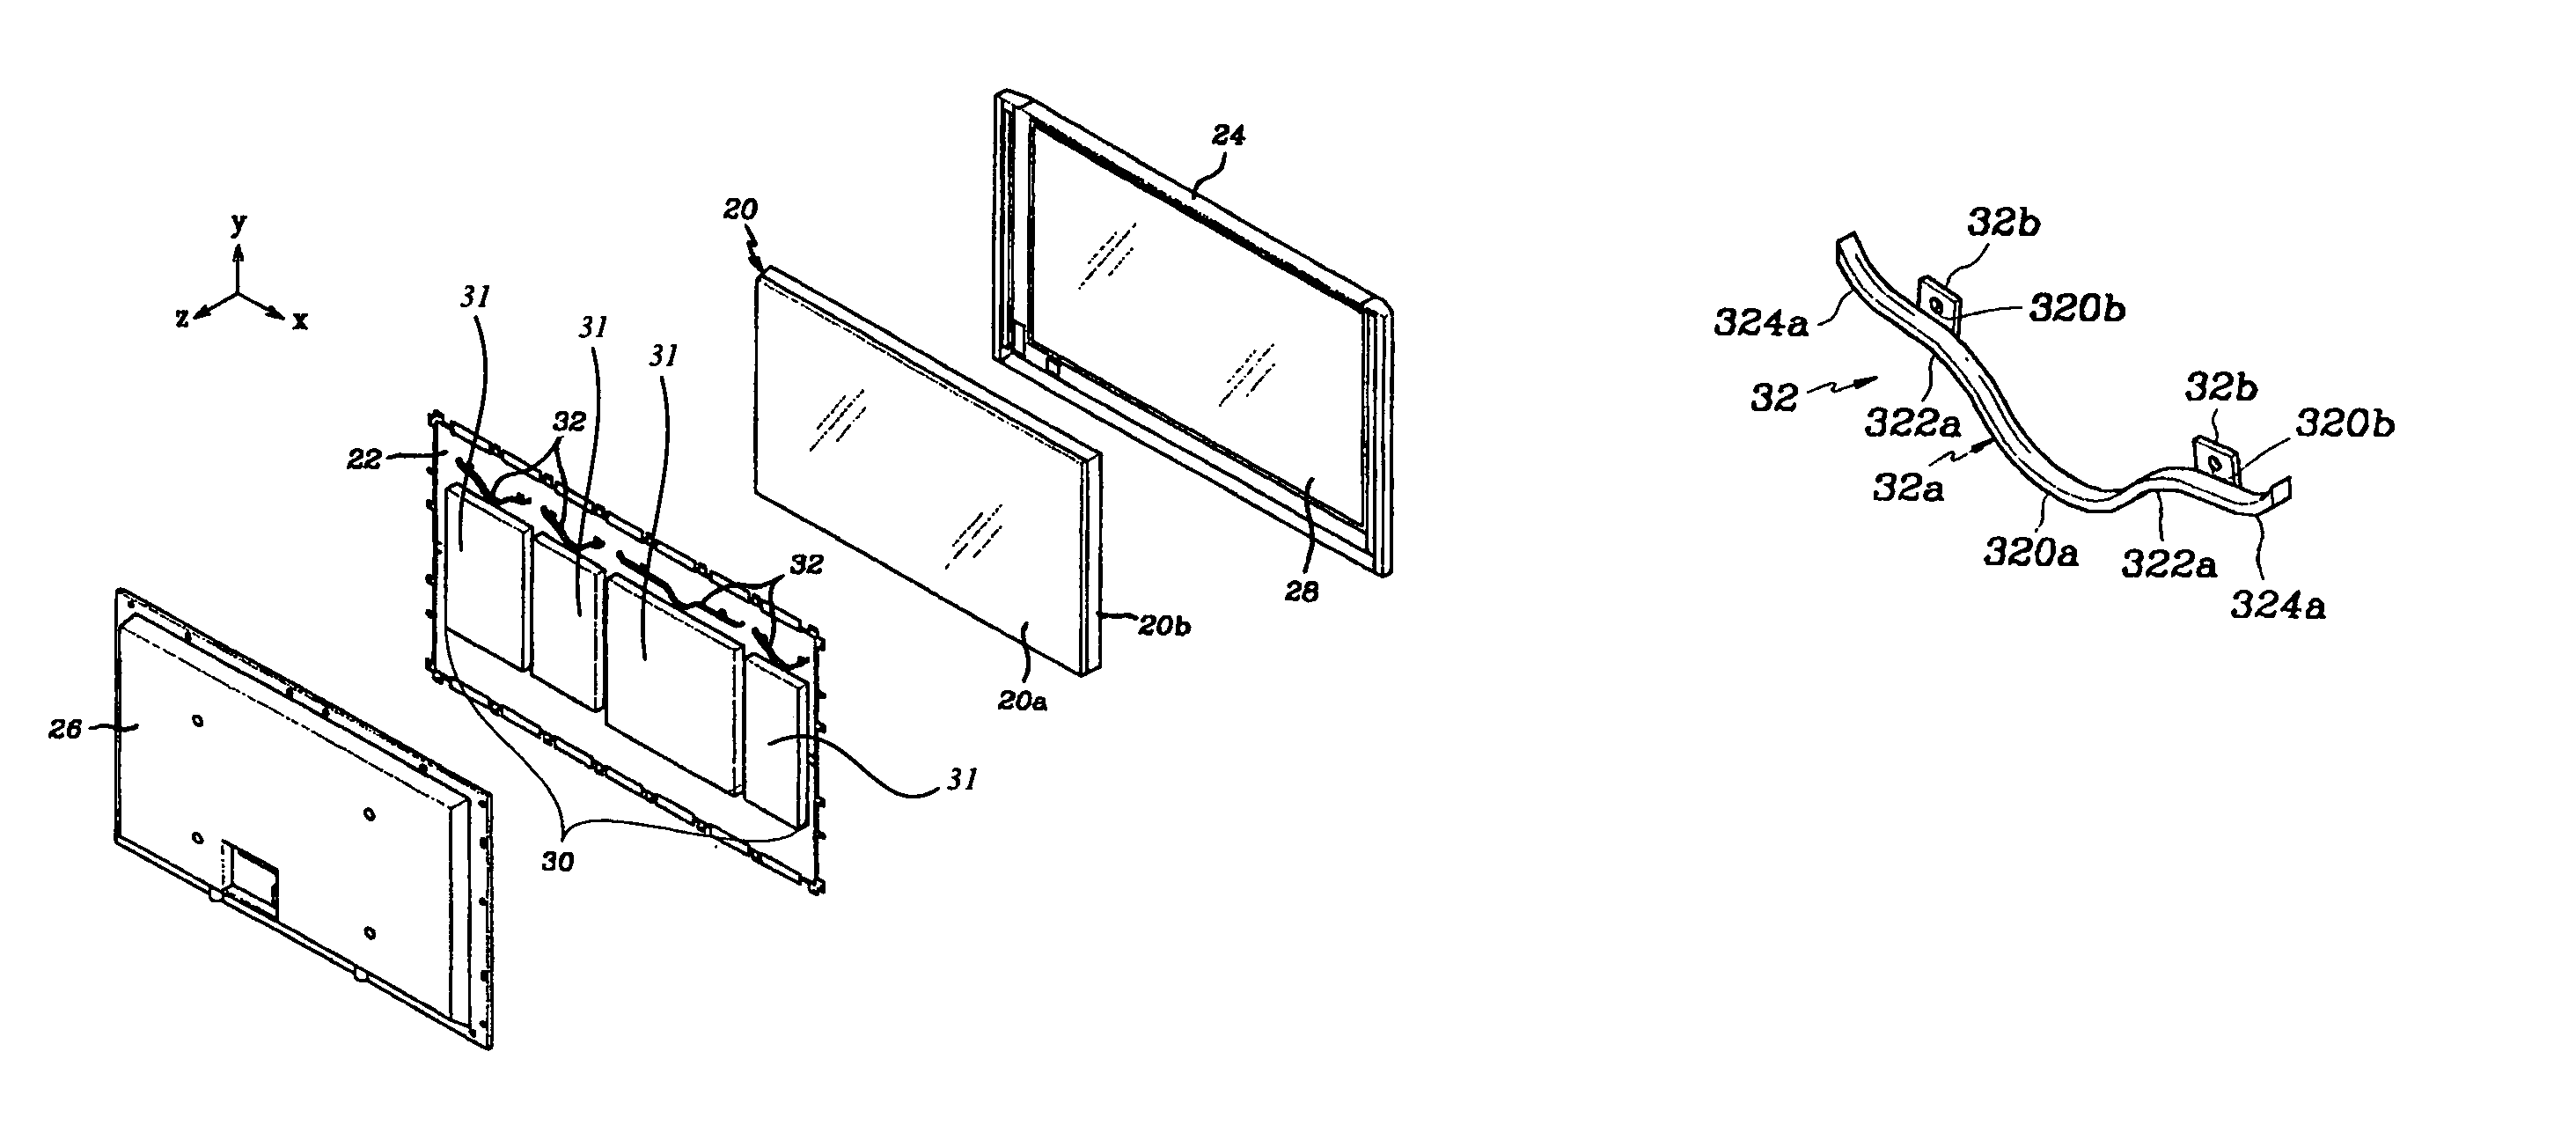 Passive apparatus that regulates a flow of heated air within a plasma display device